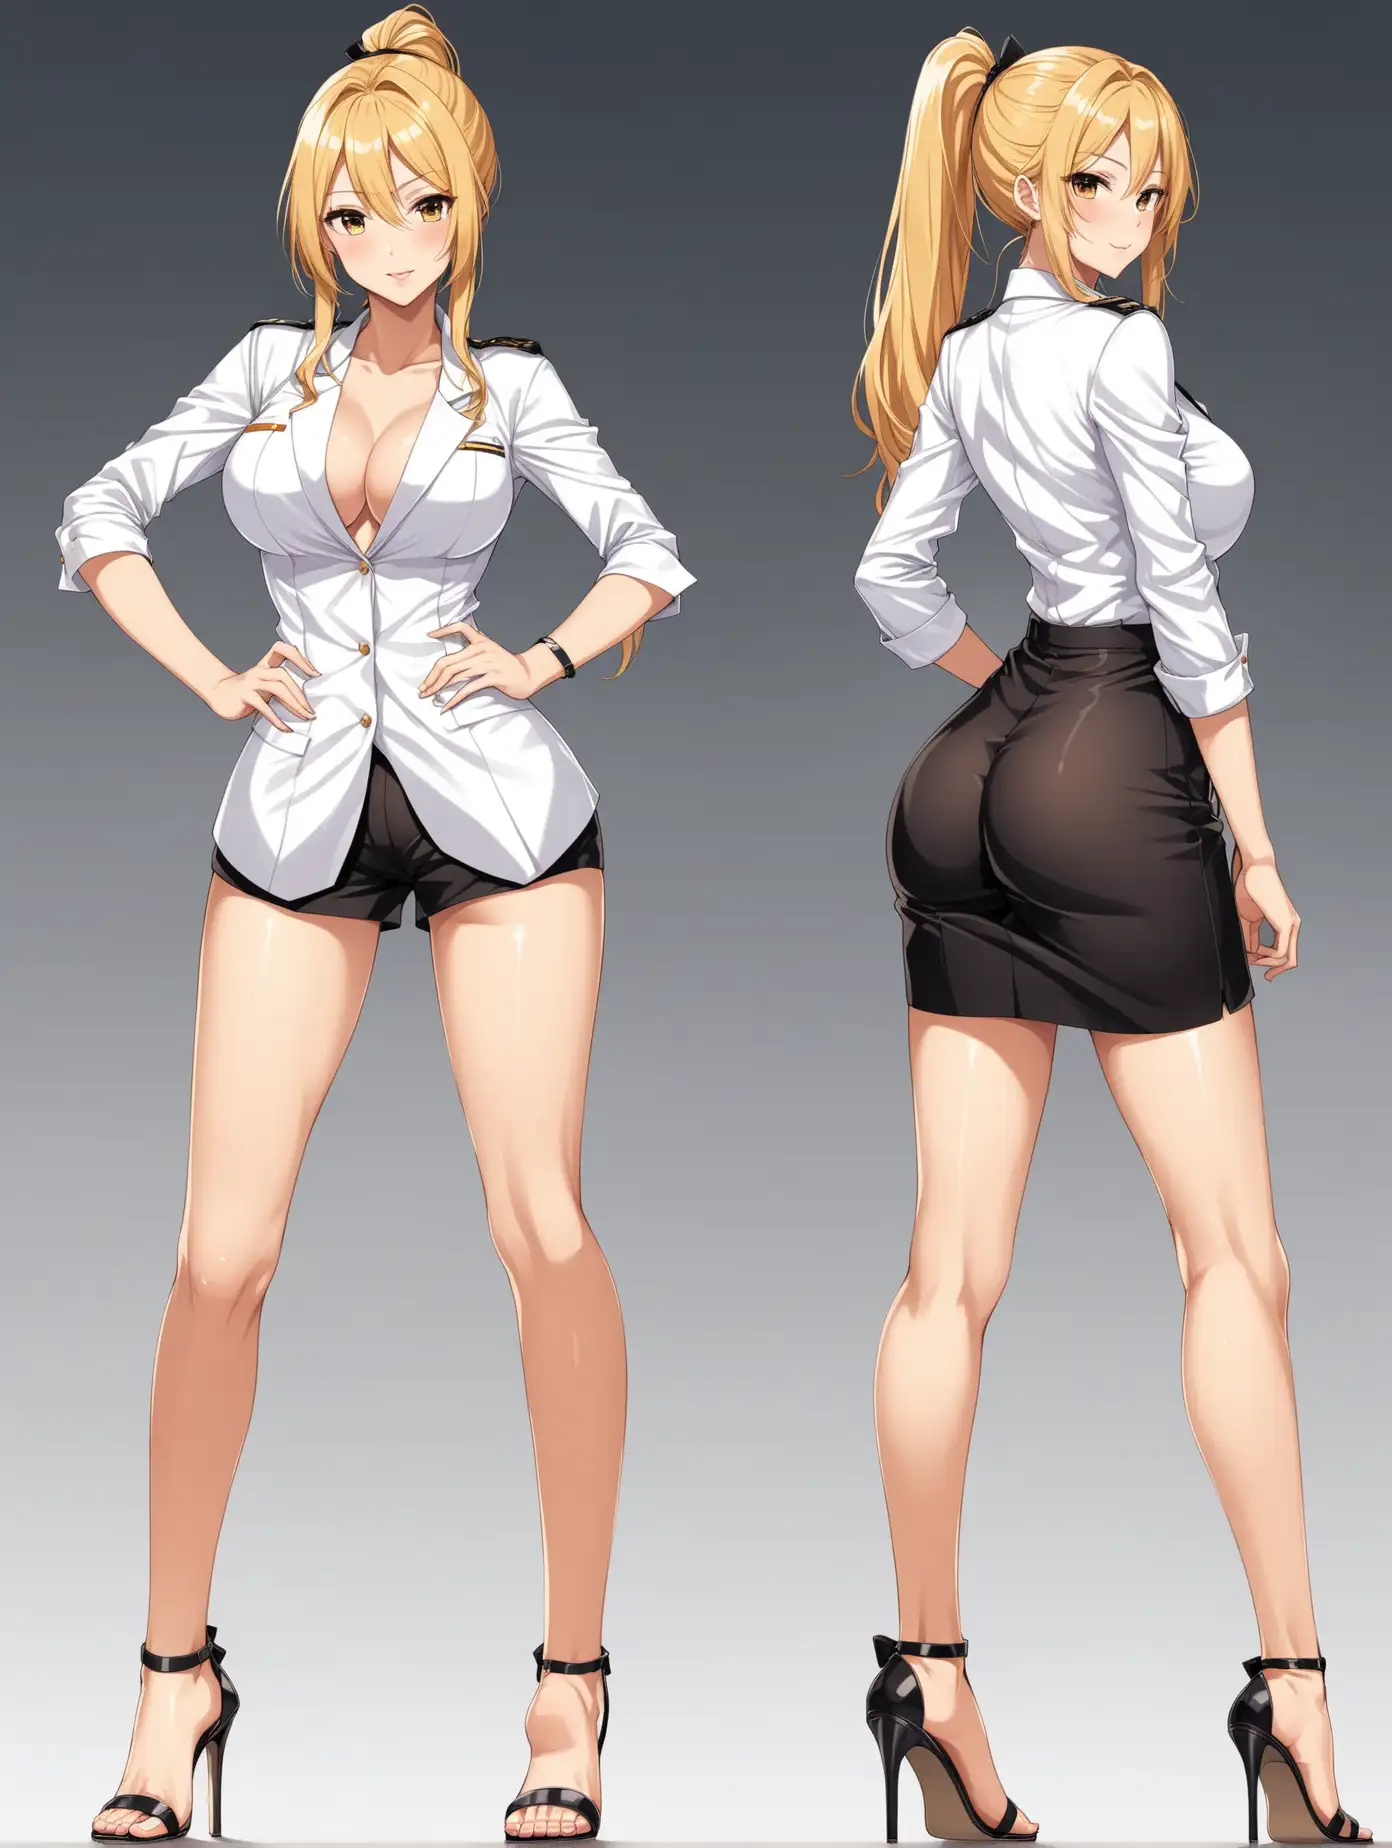 Sensual picture in full body of a hot anime girl, age 35, in director outfit, height tall, blonde hair, long ponytail, ankle strip high heels sandals, 2 poses